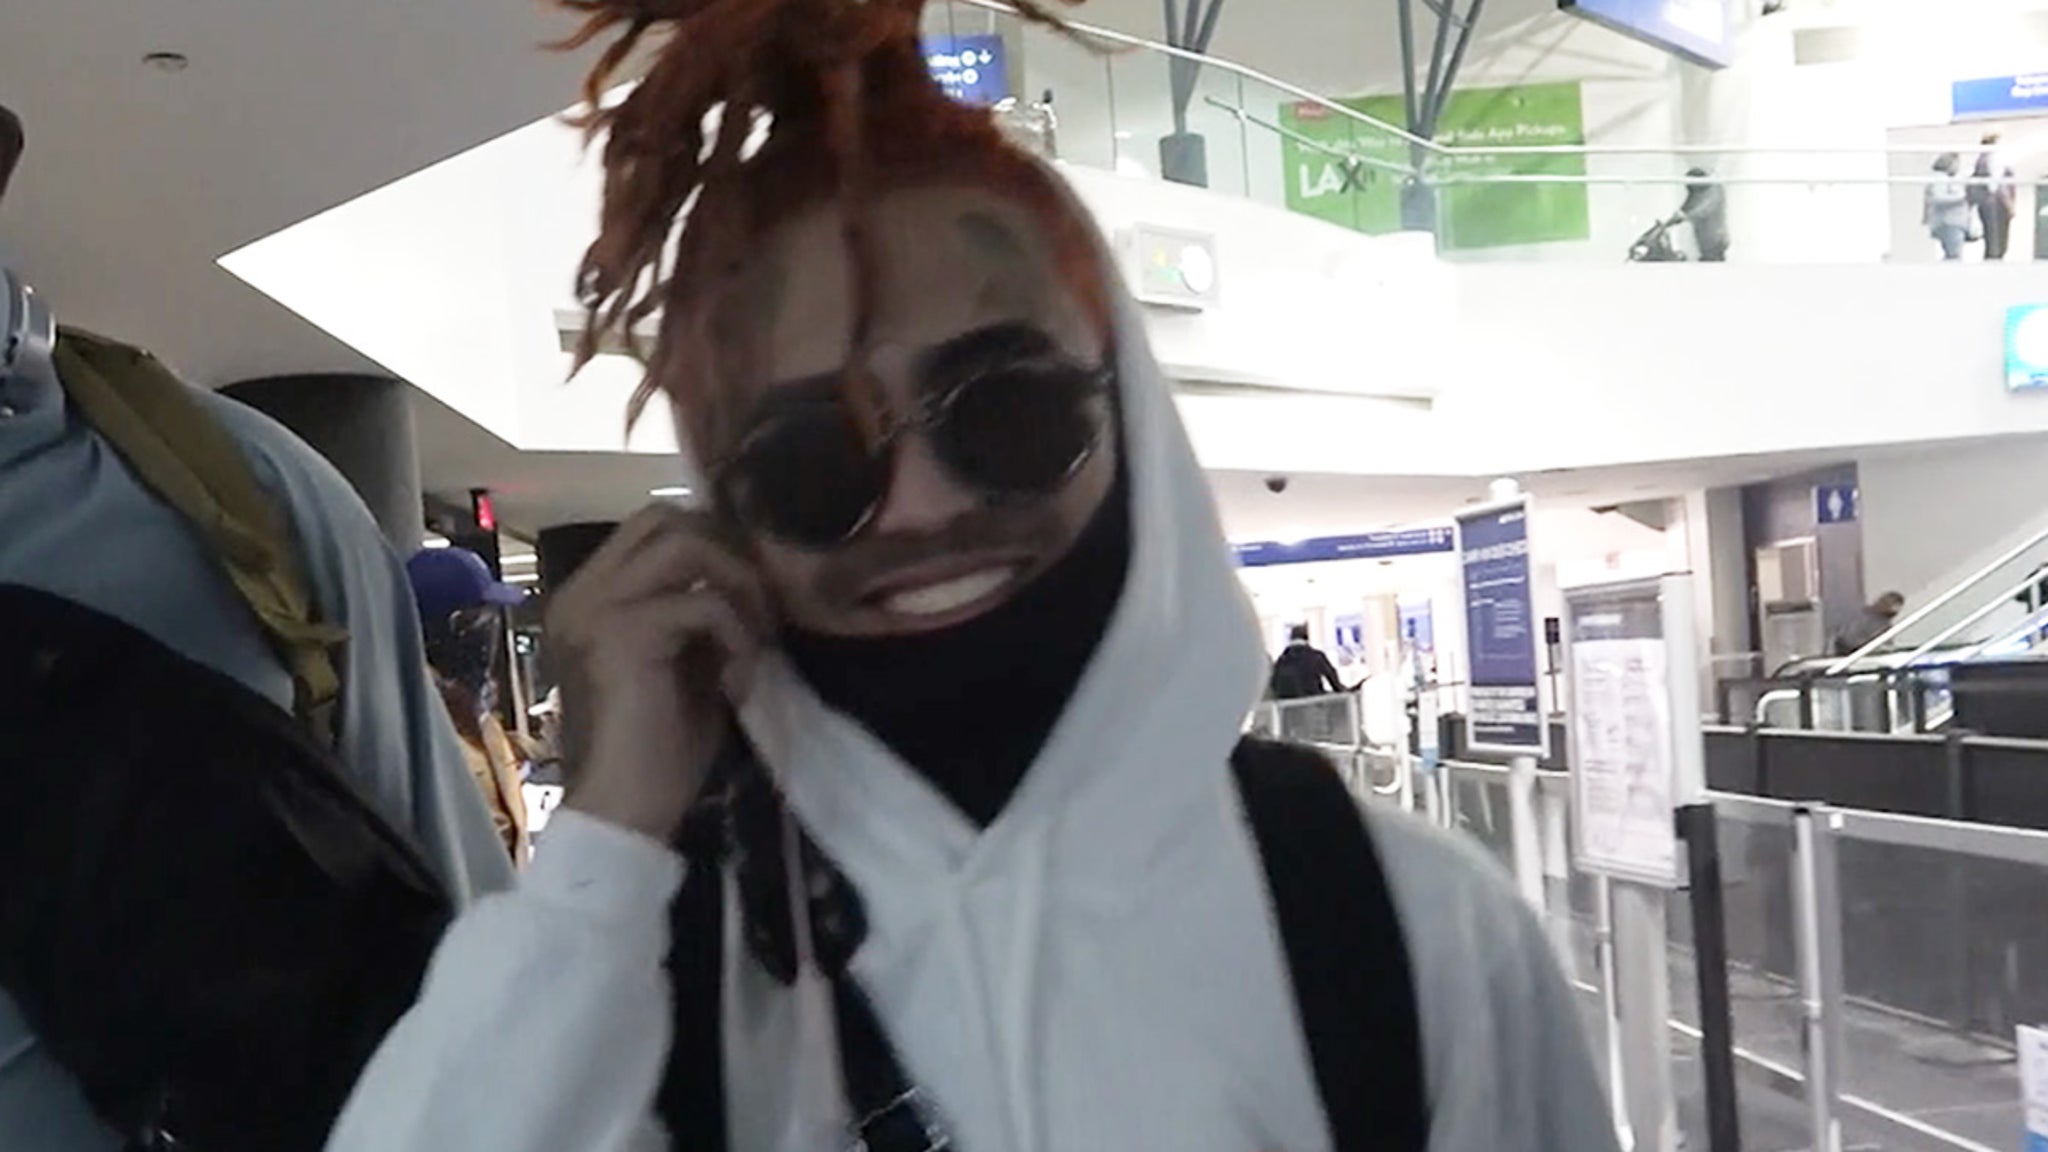 Lil Pump Boards flight, still challenging over face masks and COVID-19